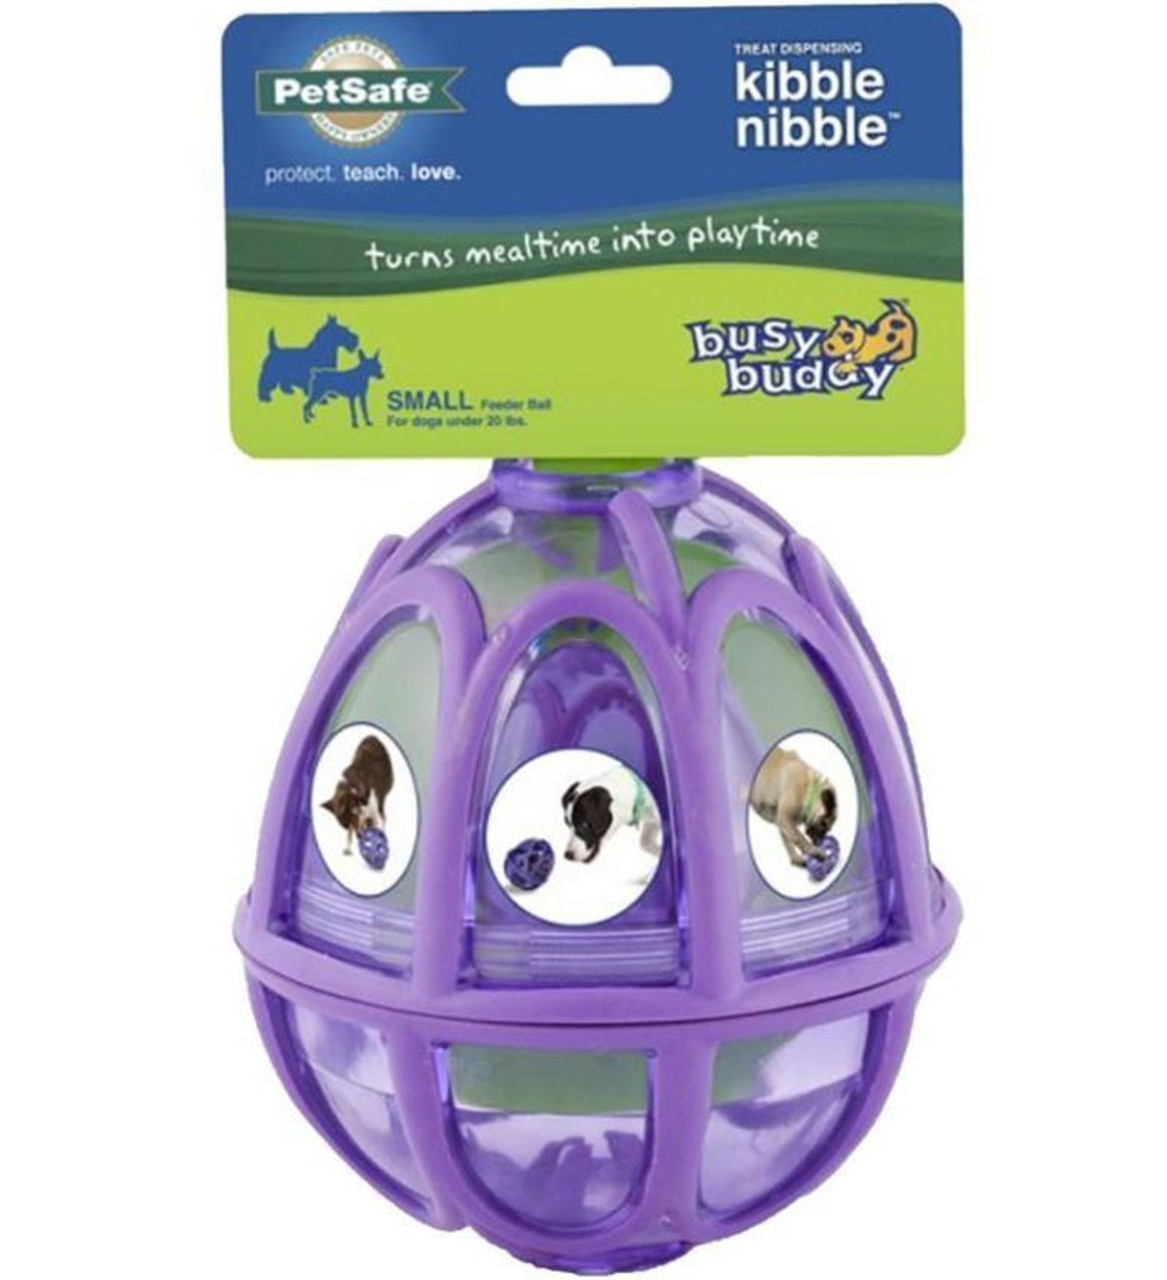 Busy Buddy Kibble Nibble Dog Toy - CountryMax